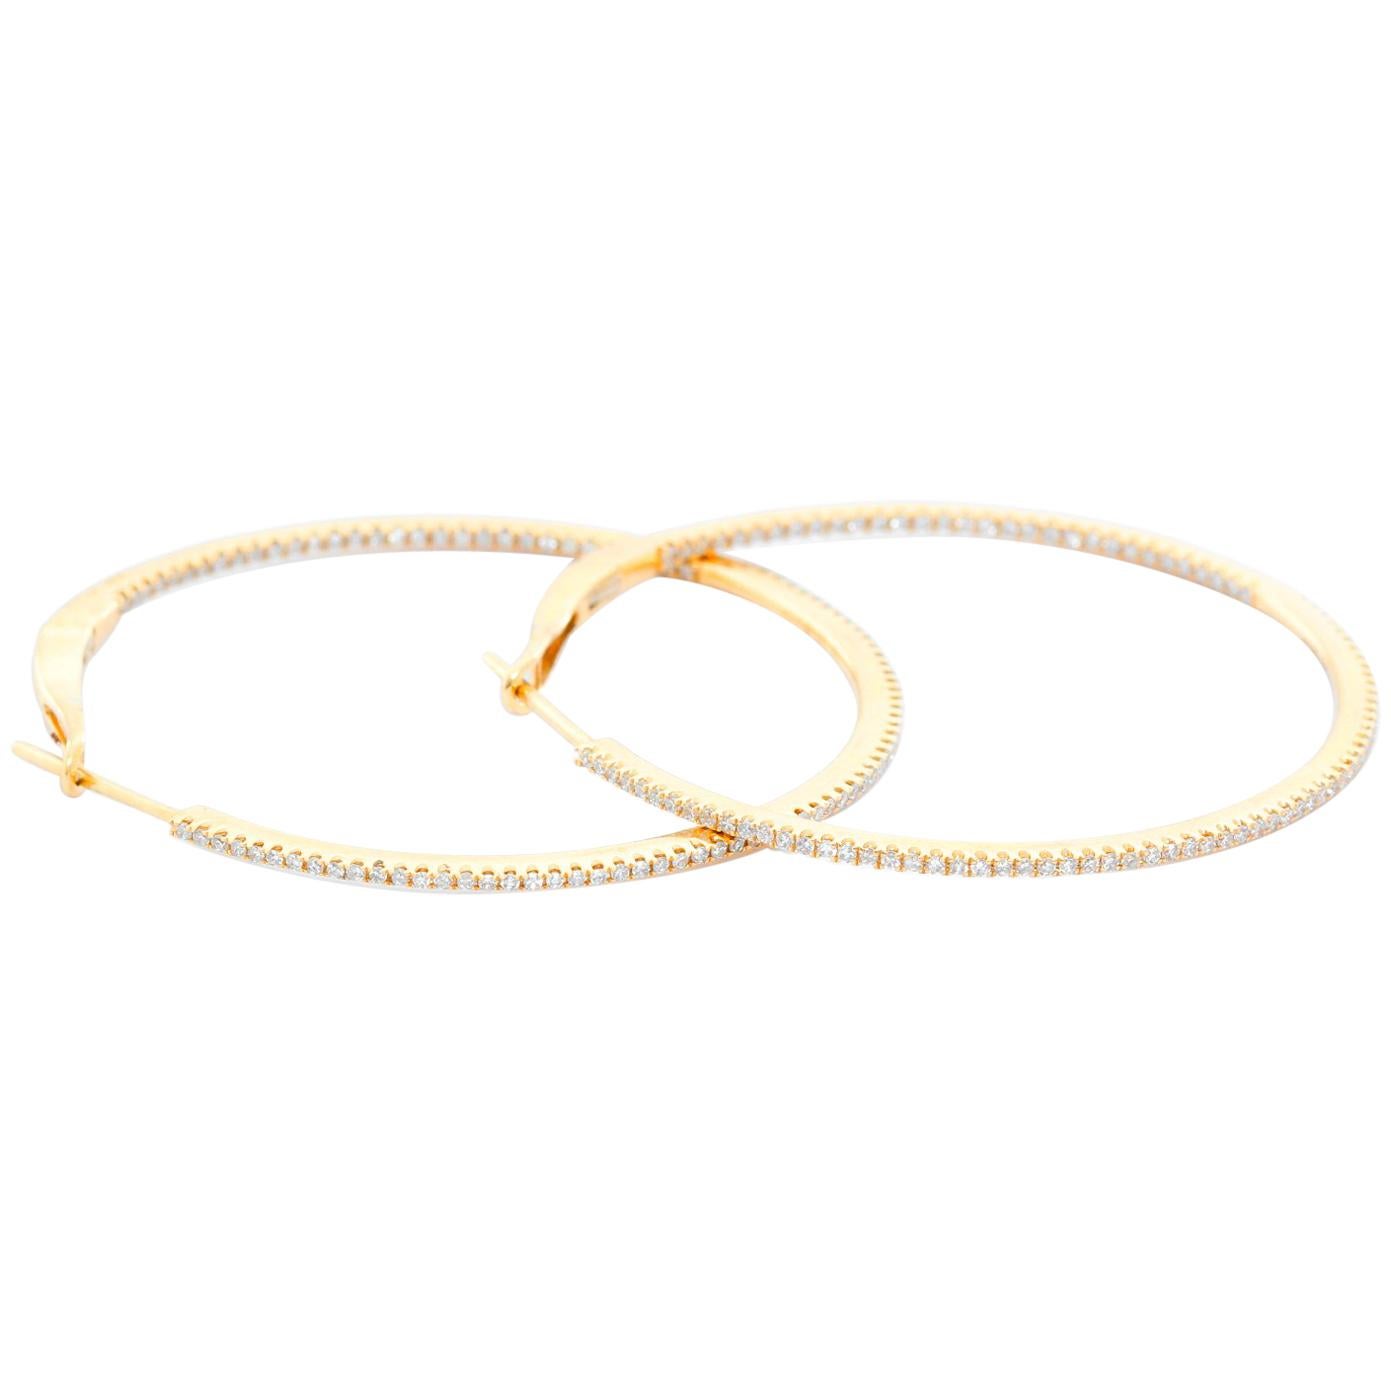 14 Karat Yellow Gold Round Inside Out Hoops